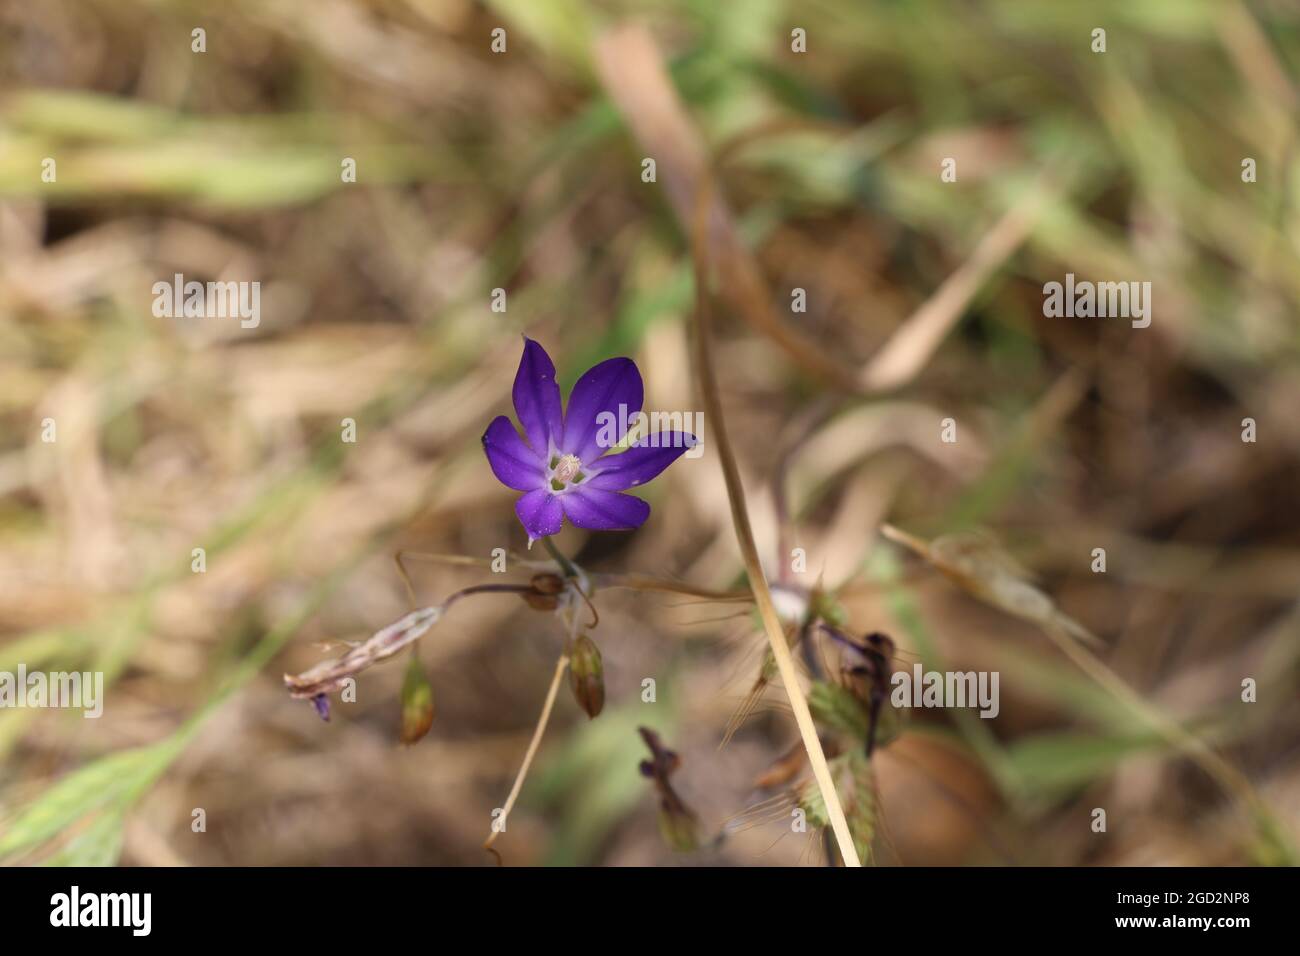 Thread-leaved brodiaea is listed as threatened under the Endangered Species Act  ca. 12 May 2017 Stock Photo